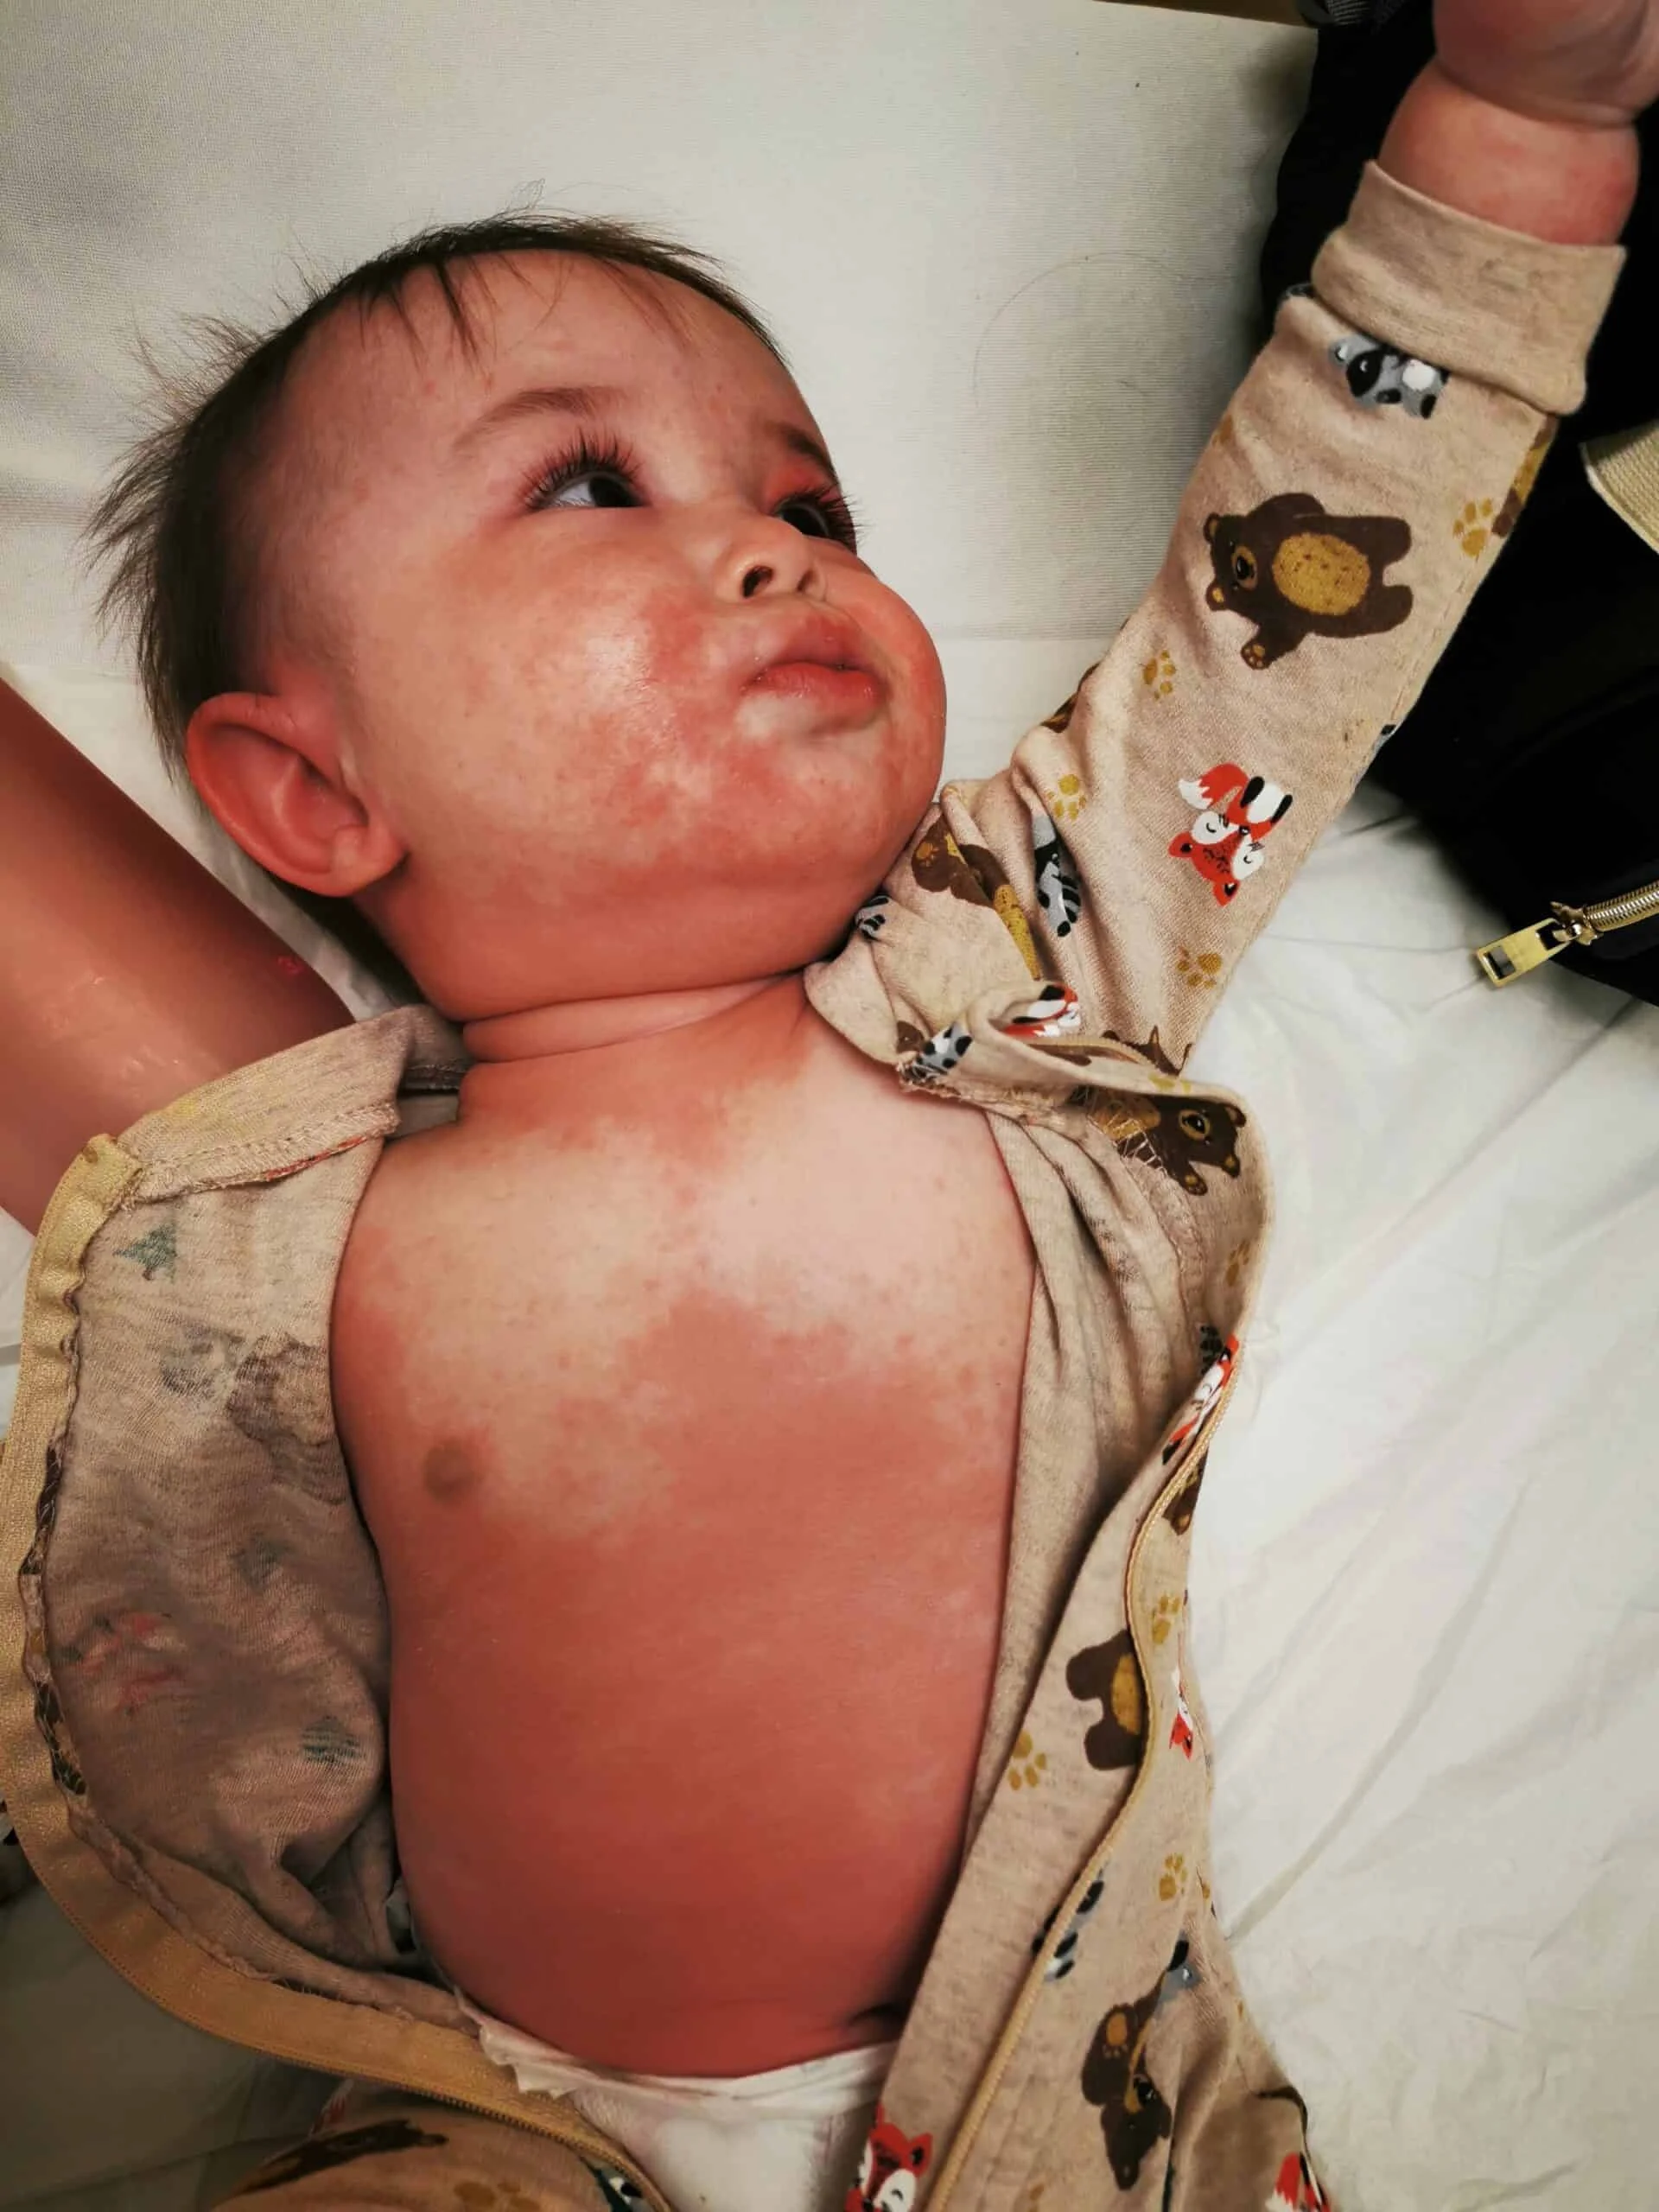 a 9 month old with widespread rash in an allergic reaction